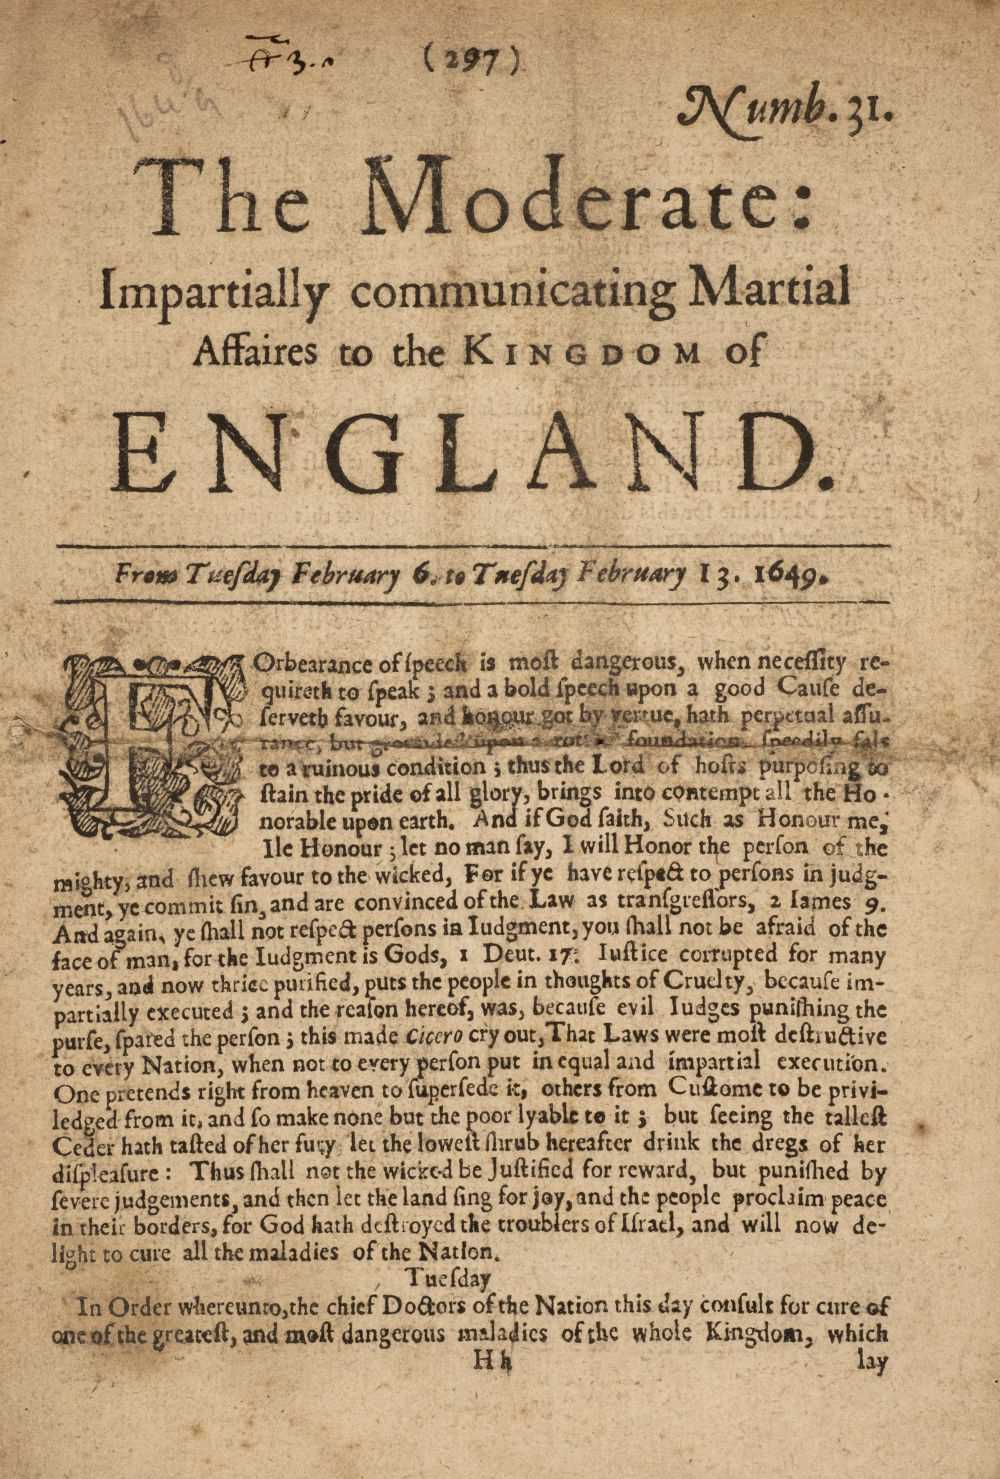 Lot 267 - English Civil War. The Moderate: number 31, 1649